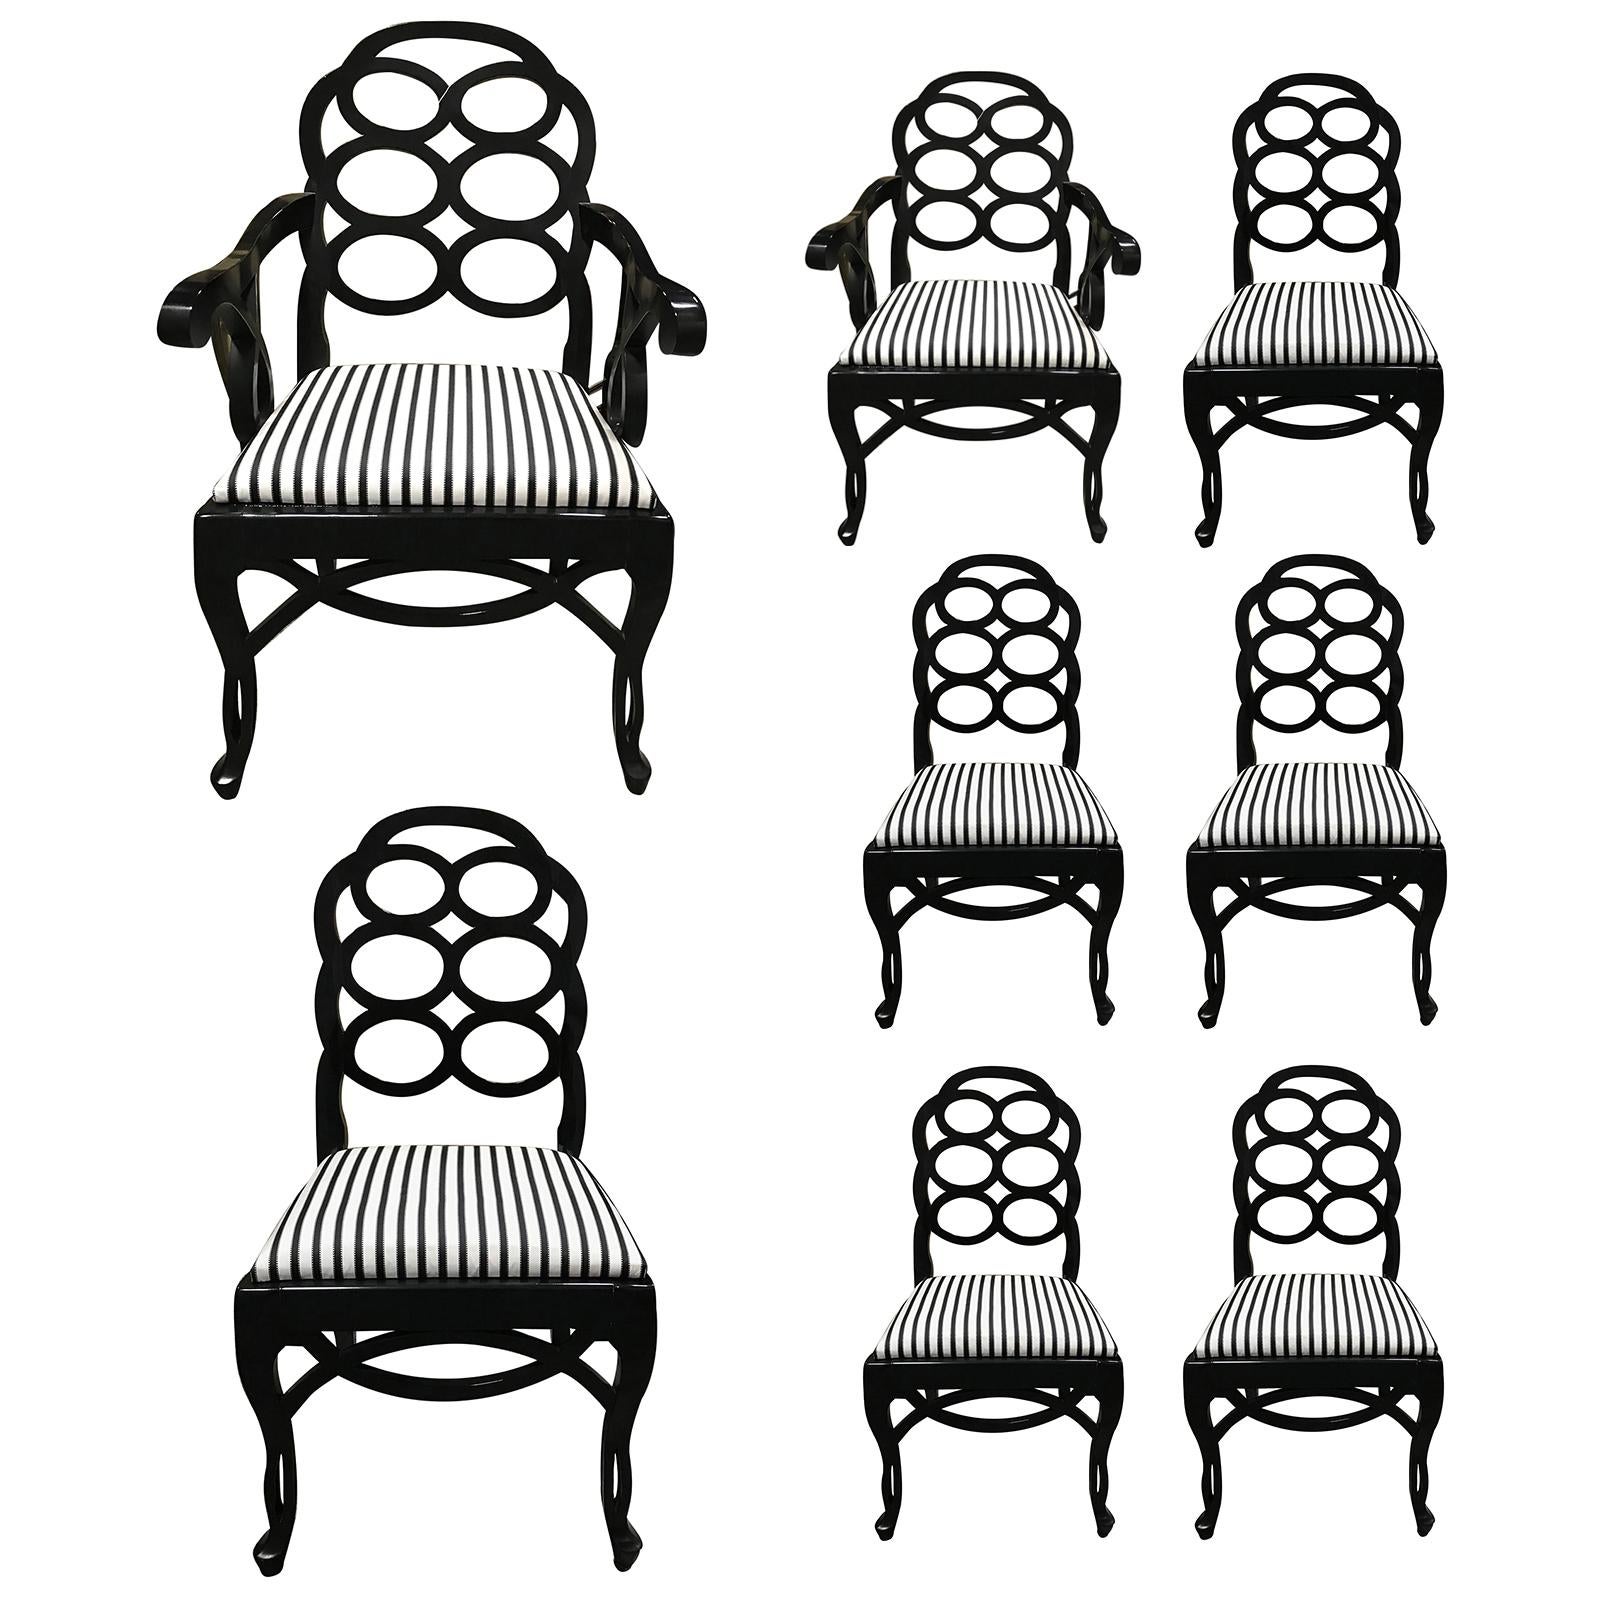 Assembled Set of 8 Loop Dining Chairs in the Style of Frances Elkins